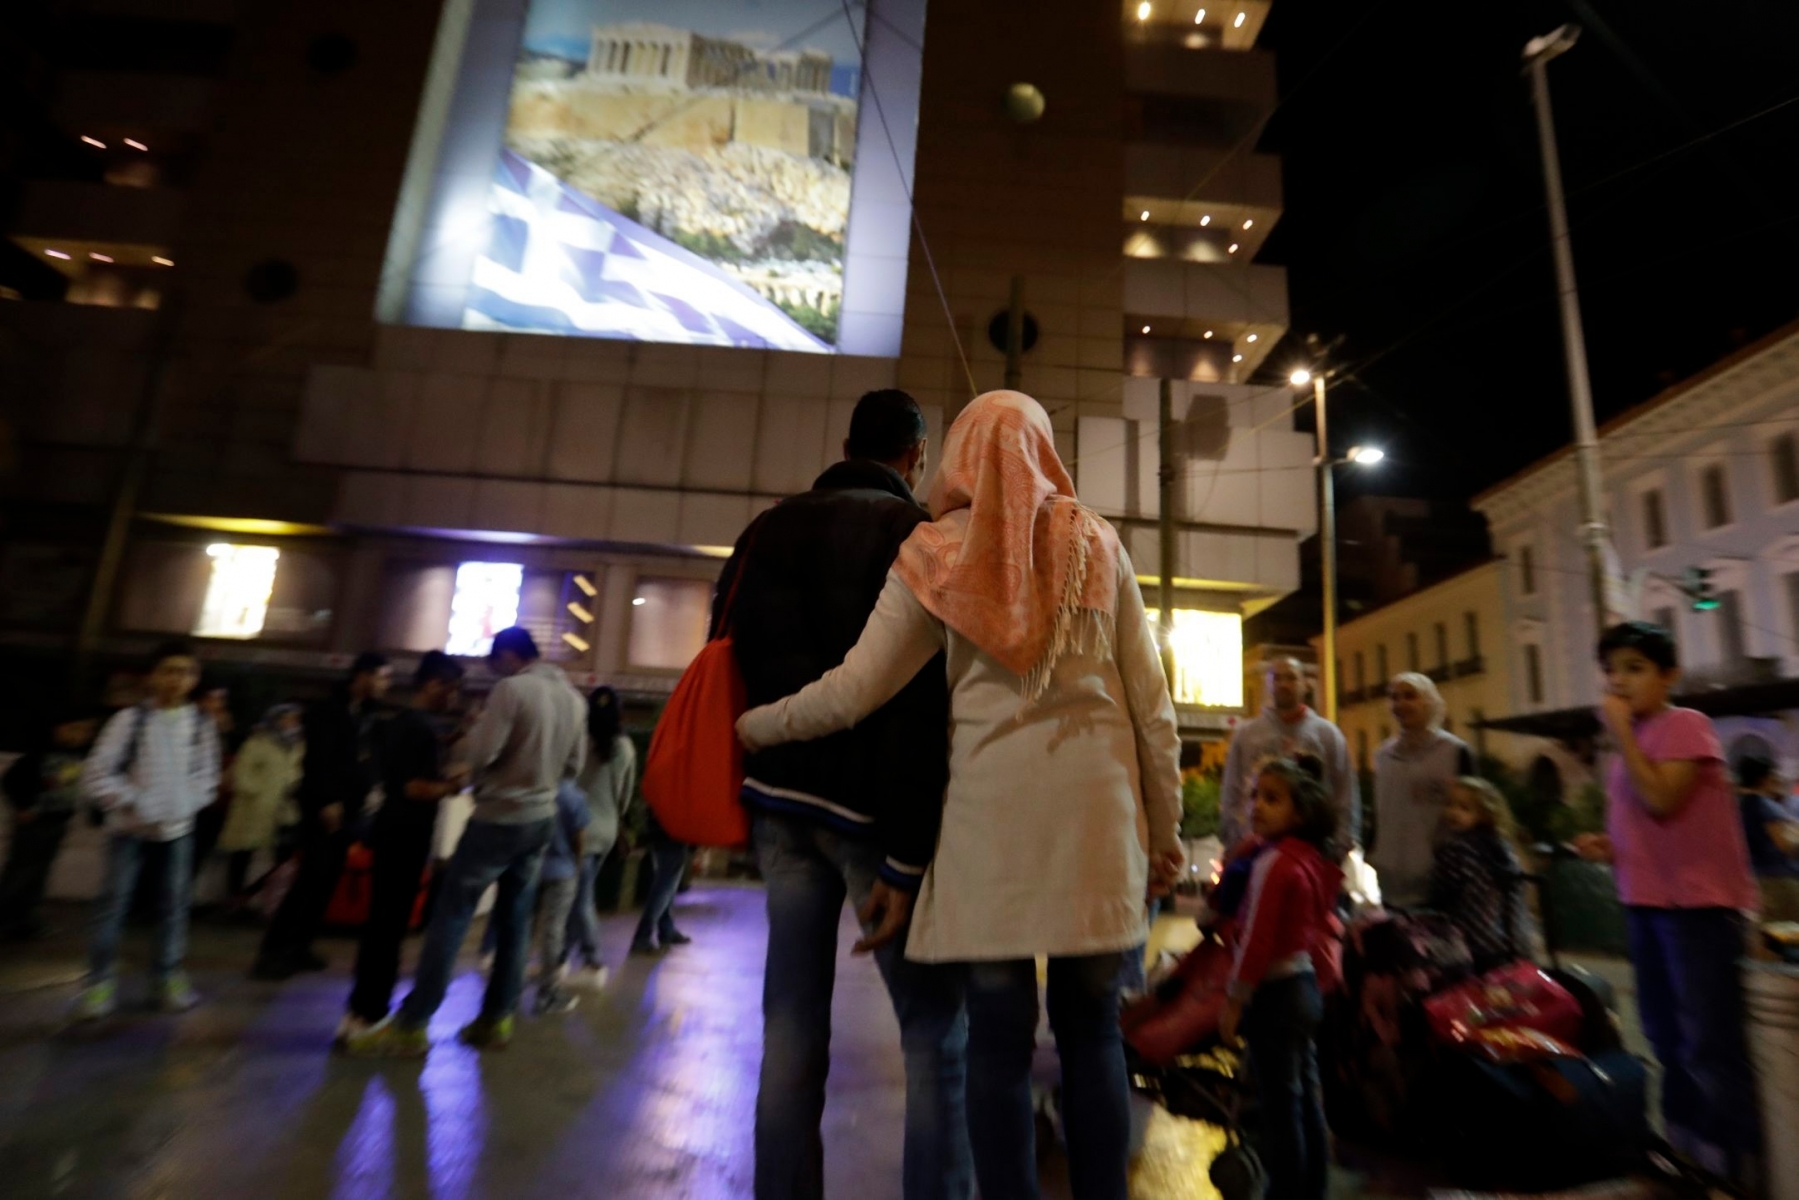 Refugees wait under an advertising banner, depicting Acropolis and the Greek flag, at Omonia square in Athens before heading to the airport for a flight to Madrid on Monday, Sept. 26, 2016. A group of 27 Syrians and four Iraqis was among the very few accepted by a European country as part of a sputtering relocation program designed to relieve pressure on Greece and Italy, the main entry points for those fleeing war and hoping for better lives in the European Union. (AP Photo/Thanassis Stavrakis) EUROPE MIGRANTS FAMILY'S ODYSSEY